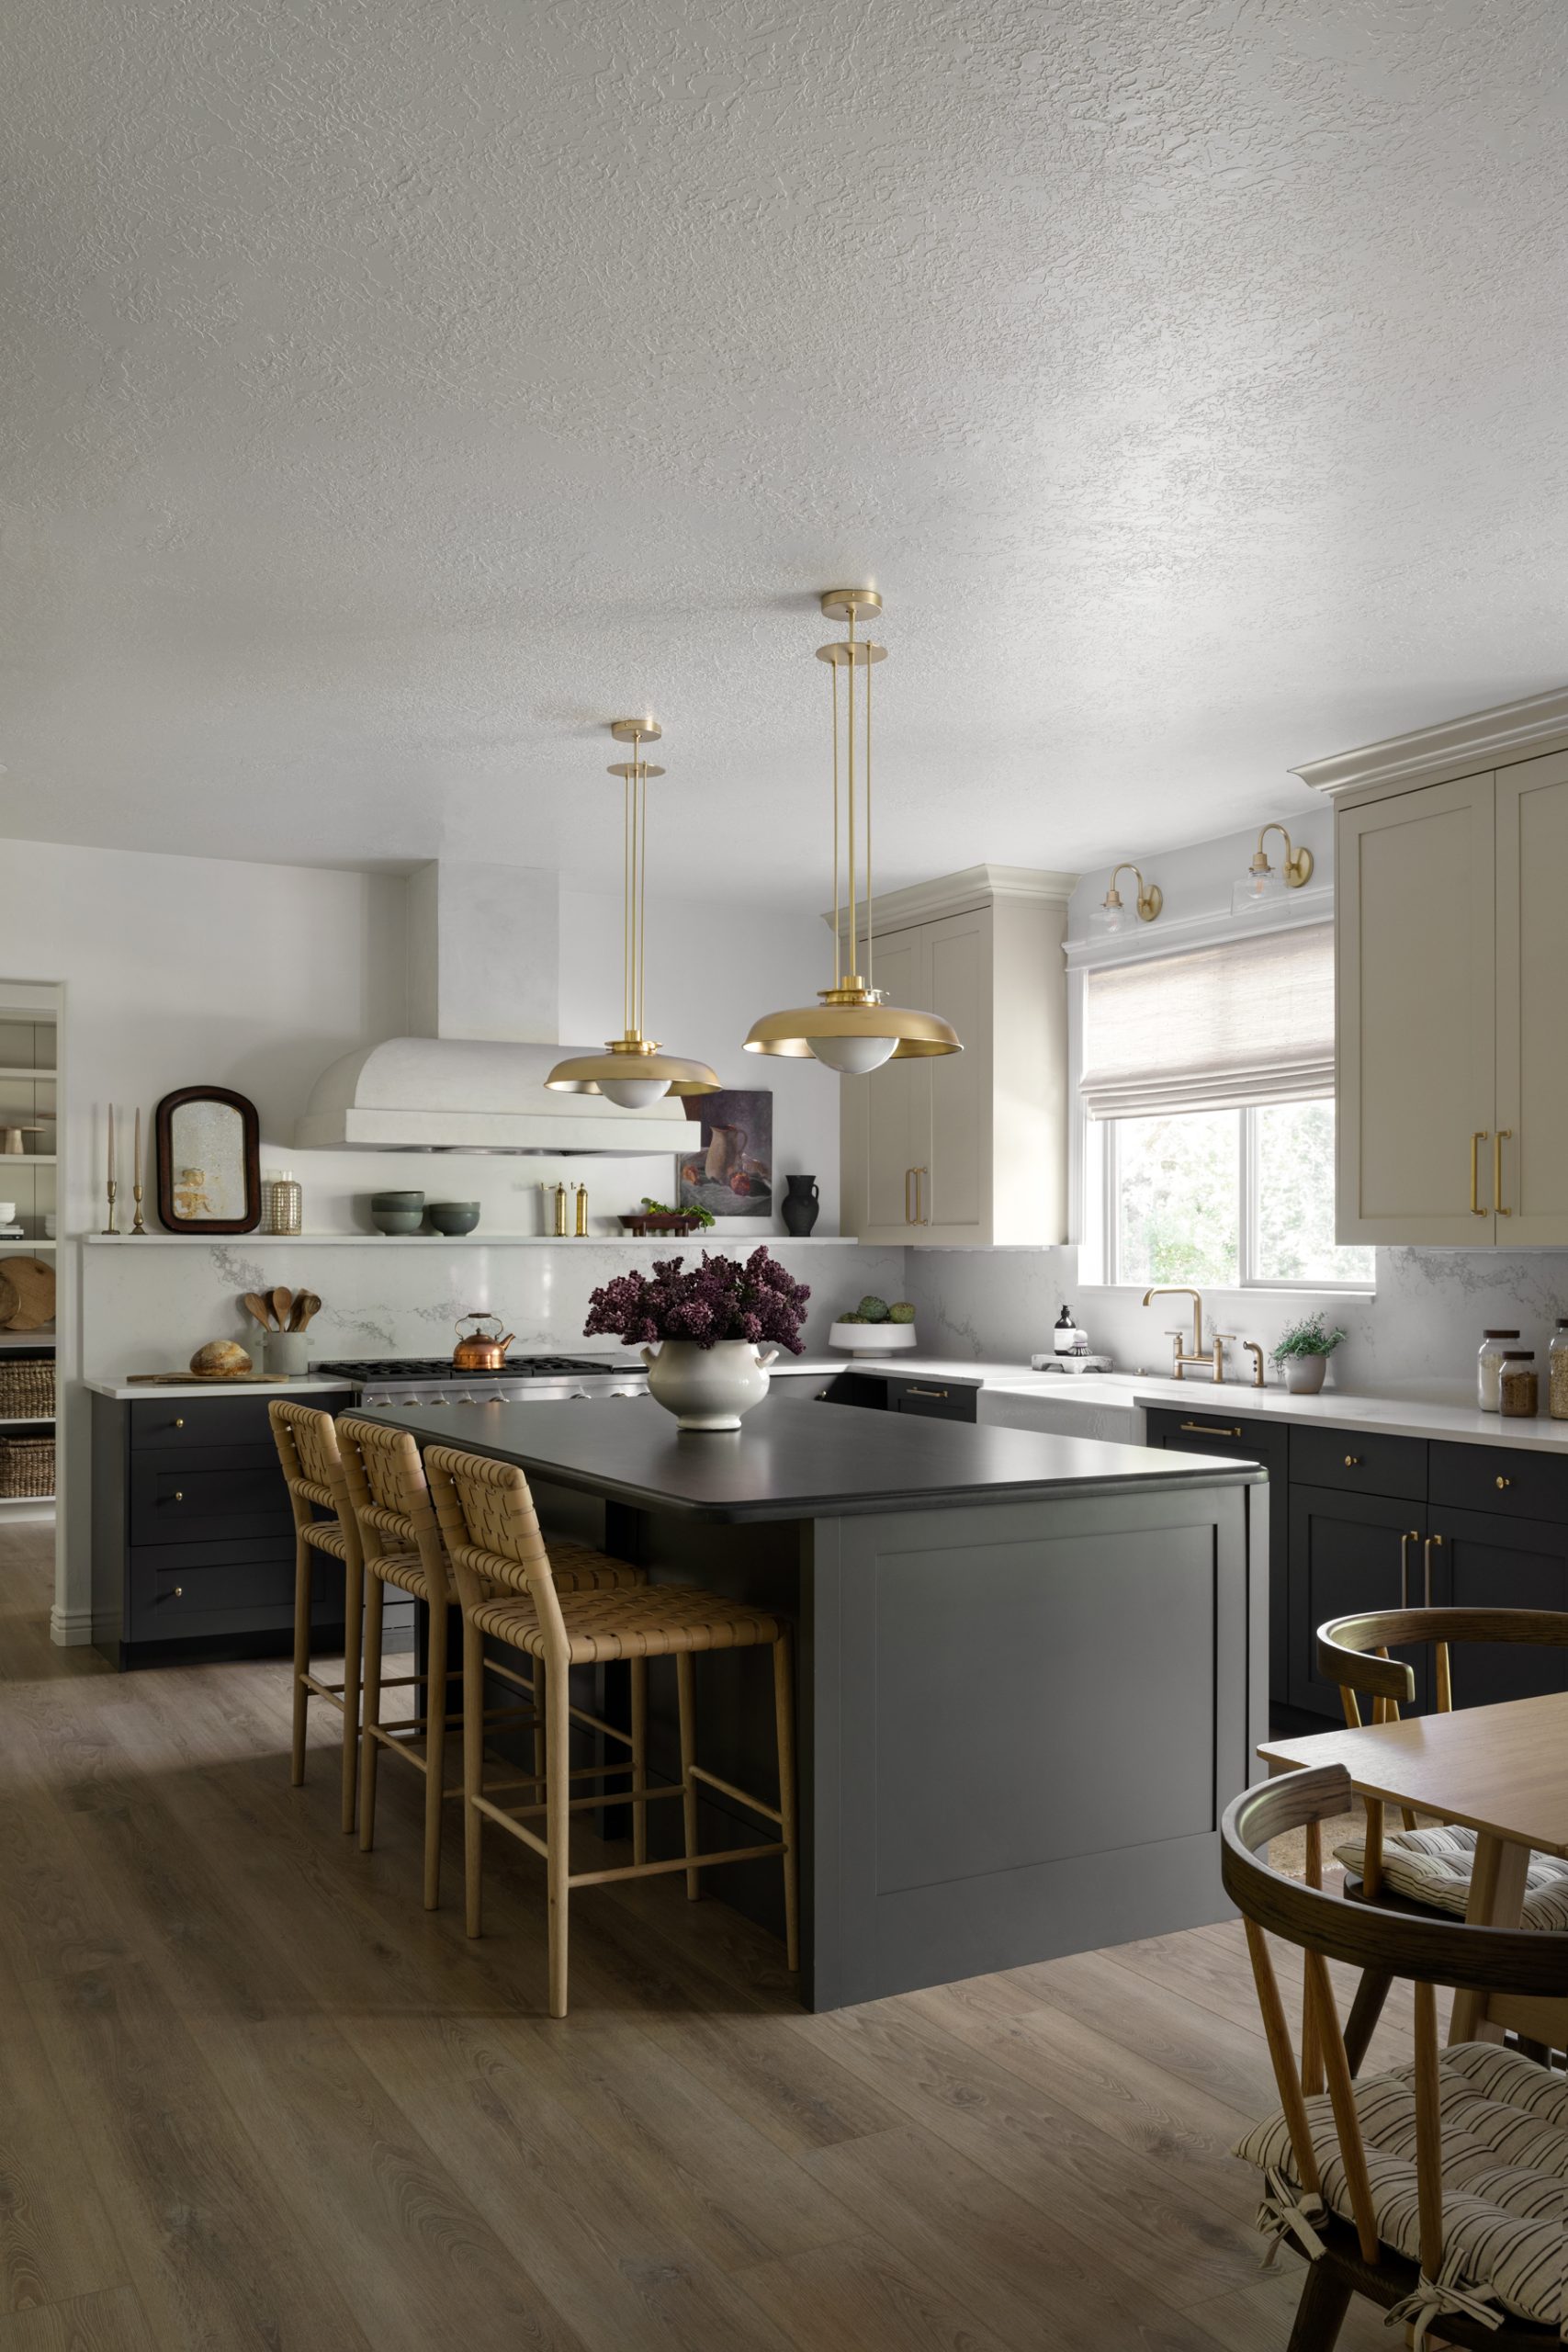 The Cottonwood Kitchen Remodel